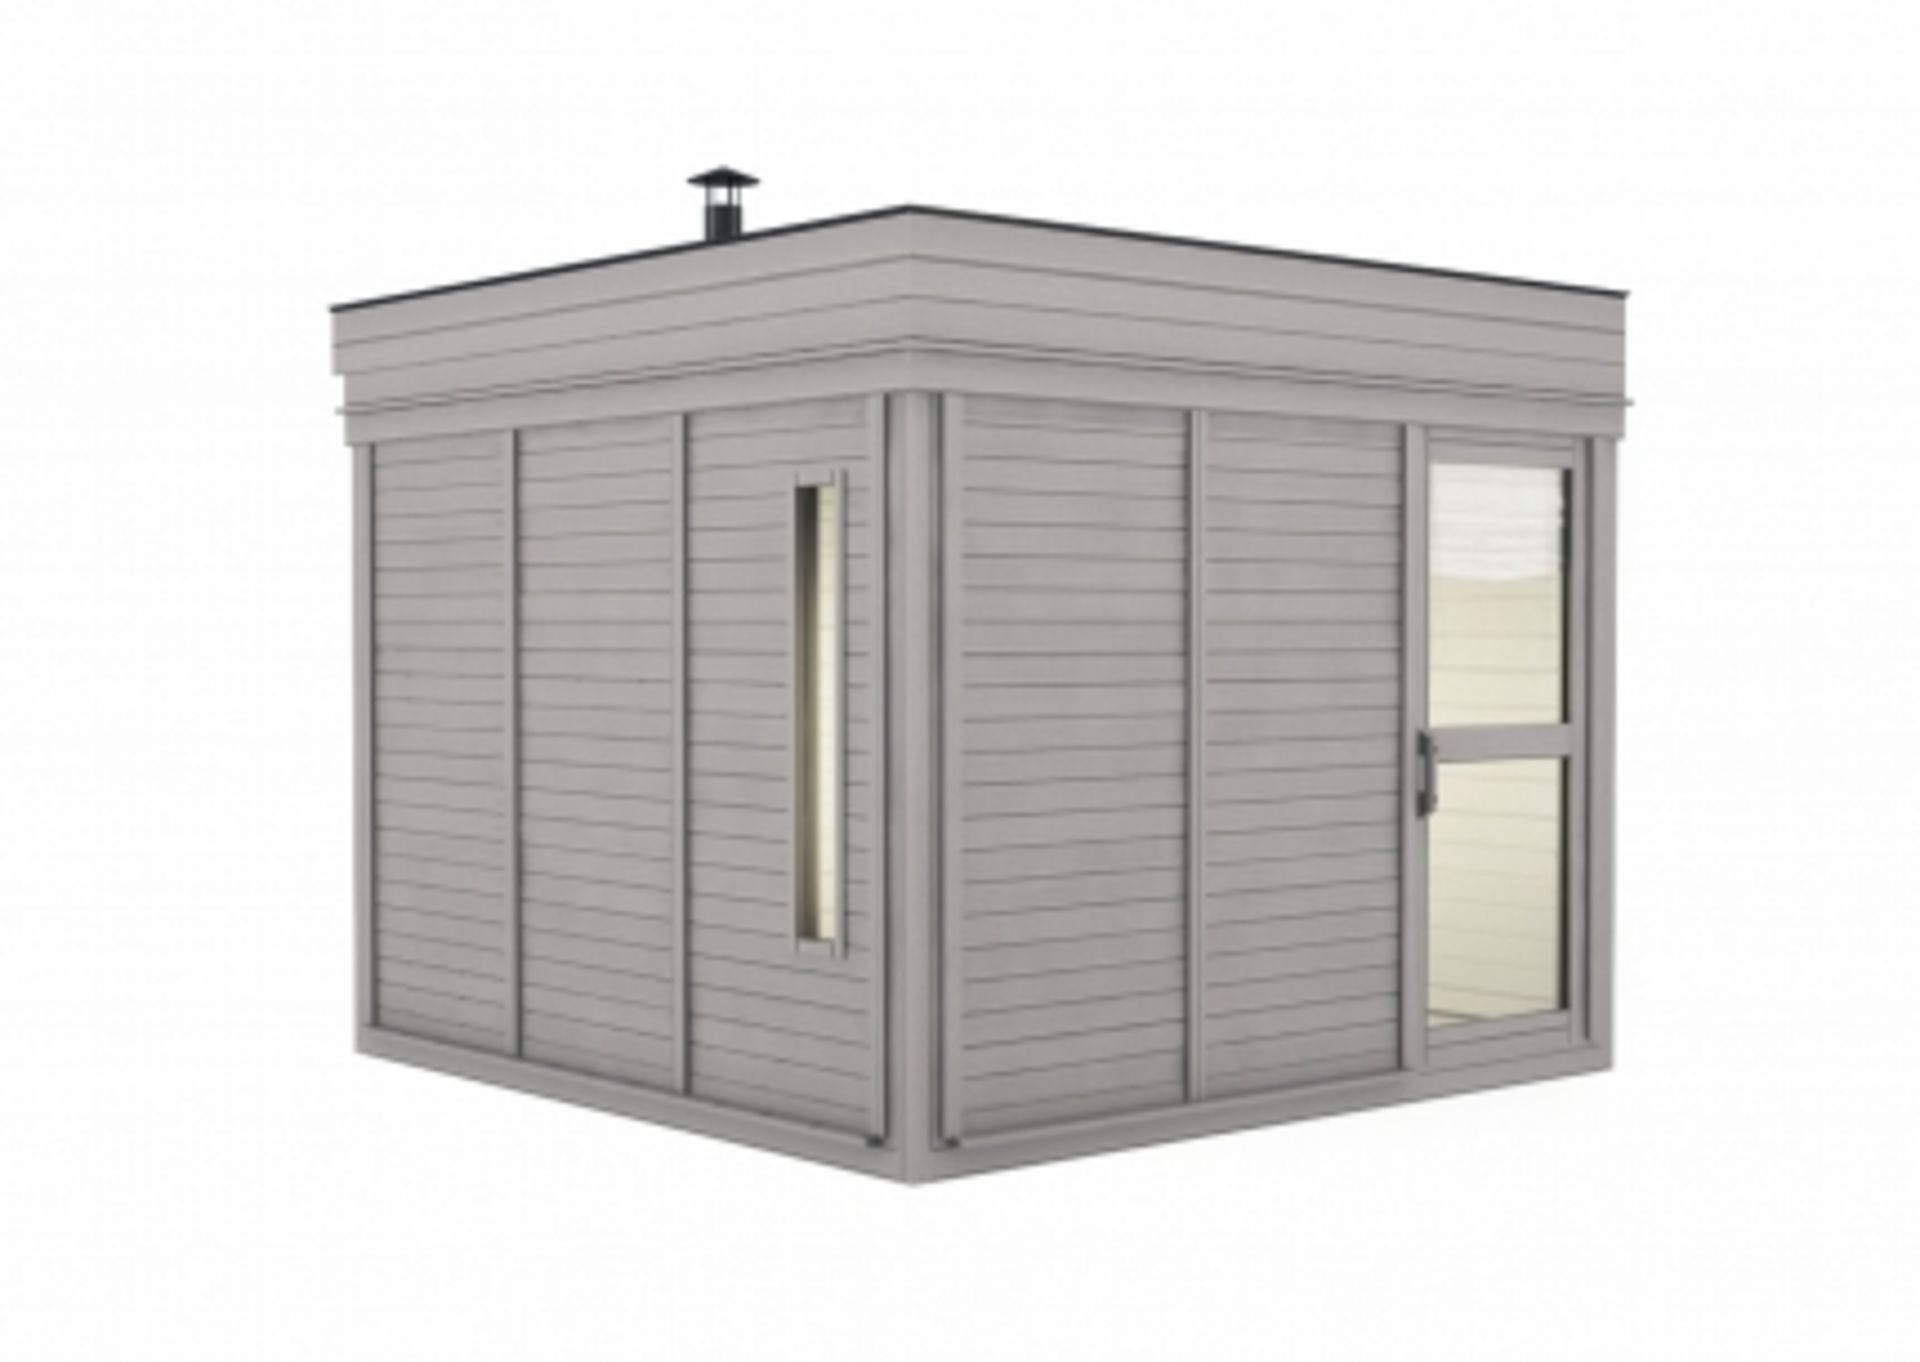 + VAT Brand New 3 x 3m Sauna Cube With Changing Room - Made From Spruce Wood - Roof Covered With